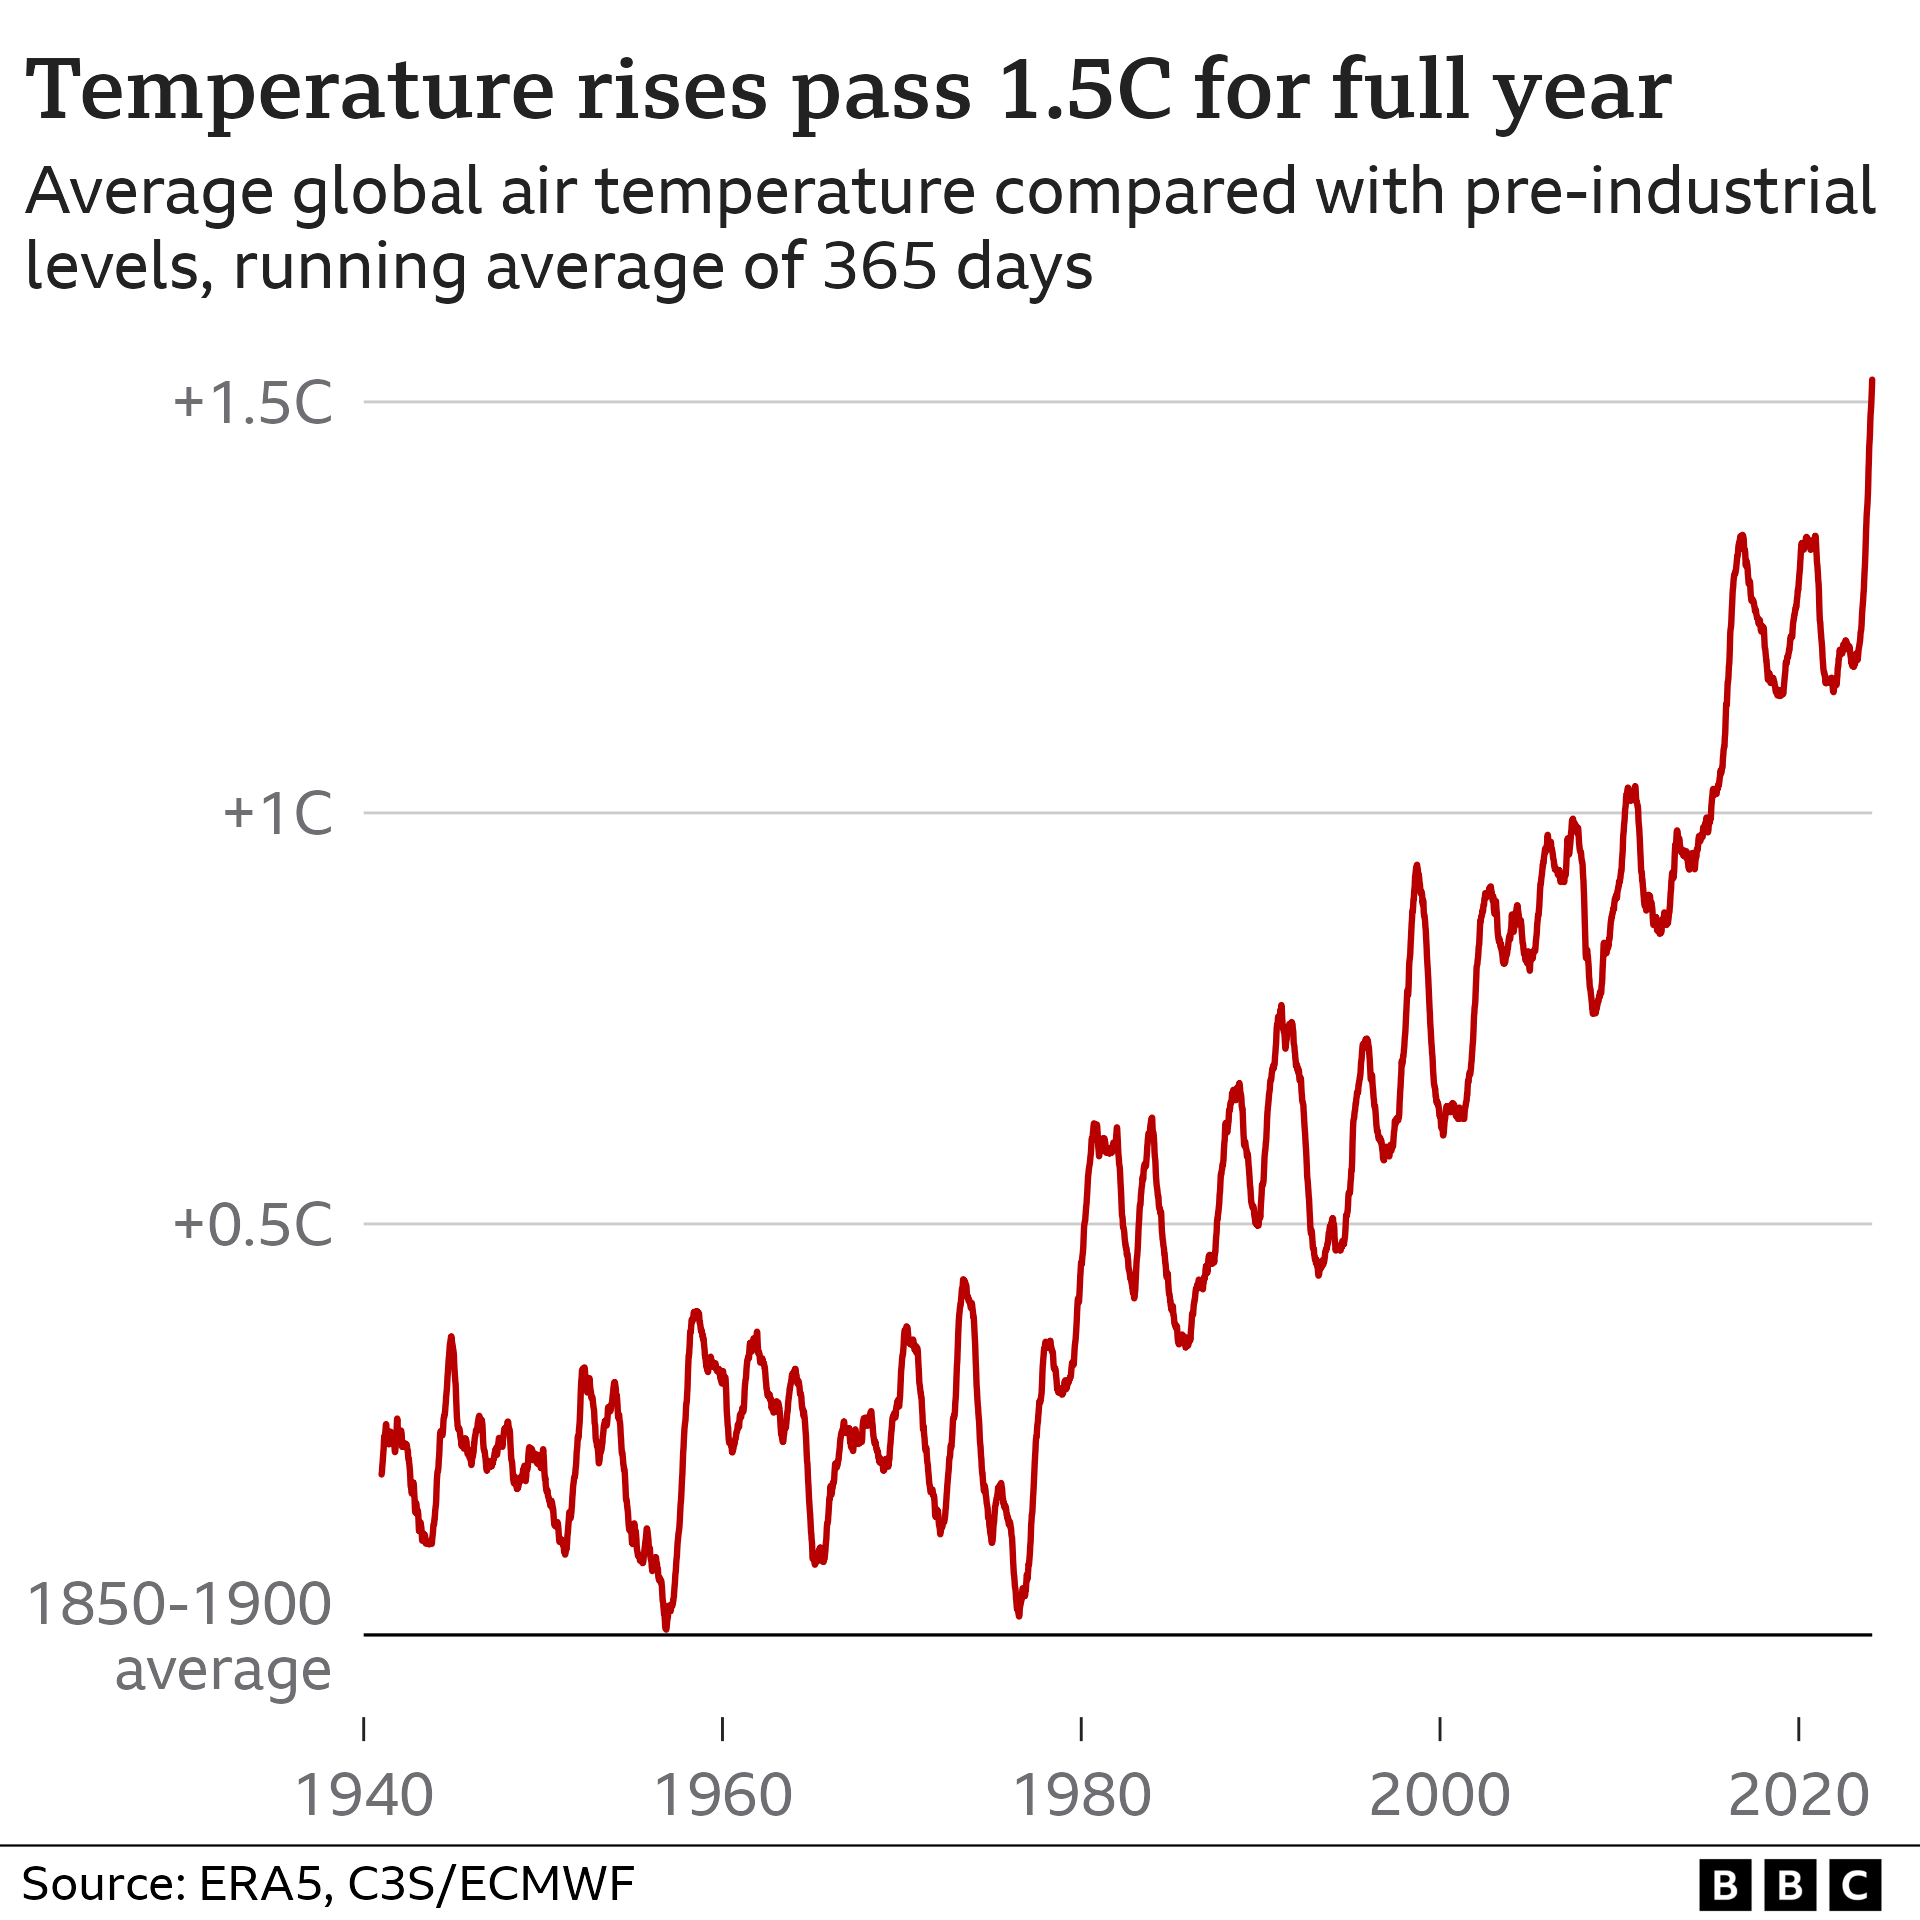 Line graph showing rolling 365 day average of global air temperatures. For the first time on record, this has passed 1.5C for the year to date. Temperatures have increased since the 1940s, where warming was around 0.2C.